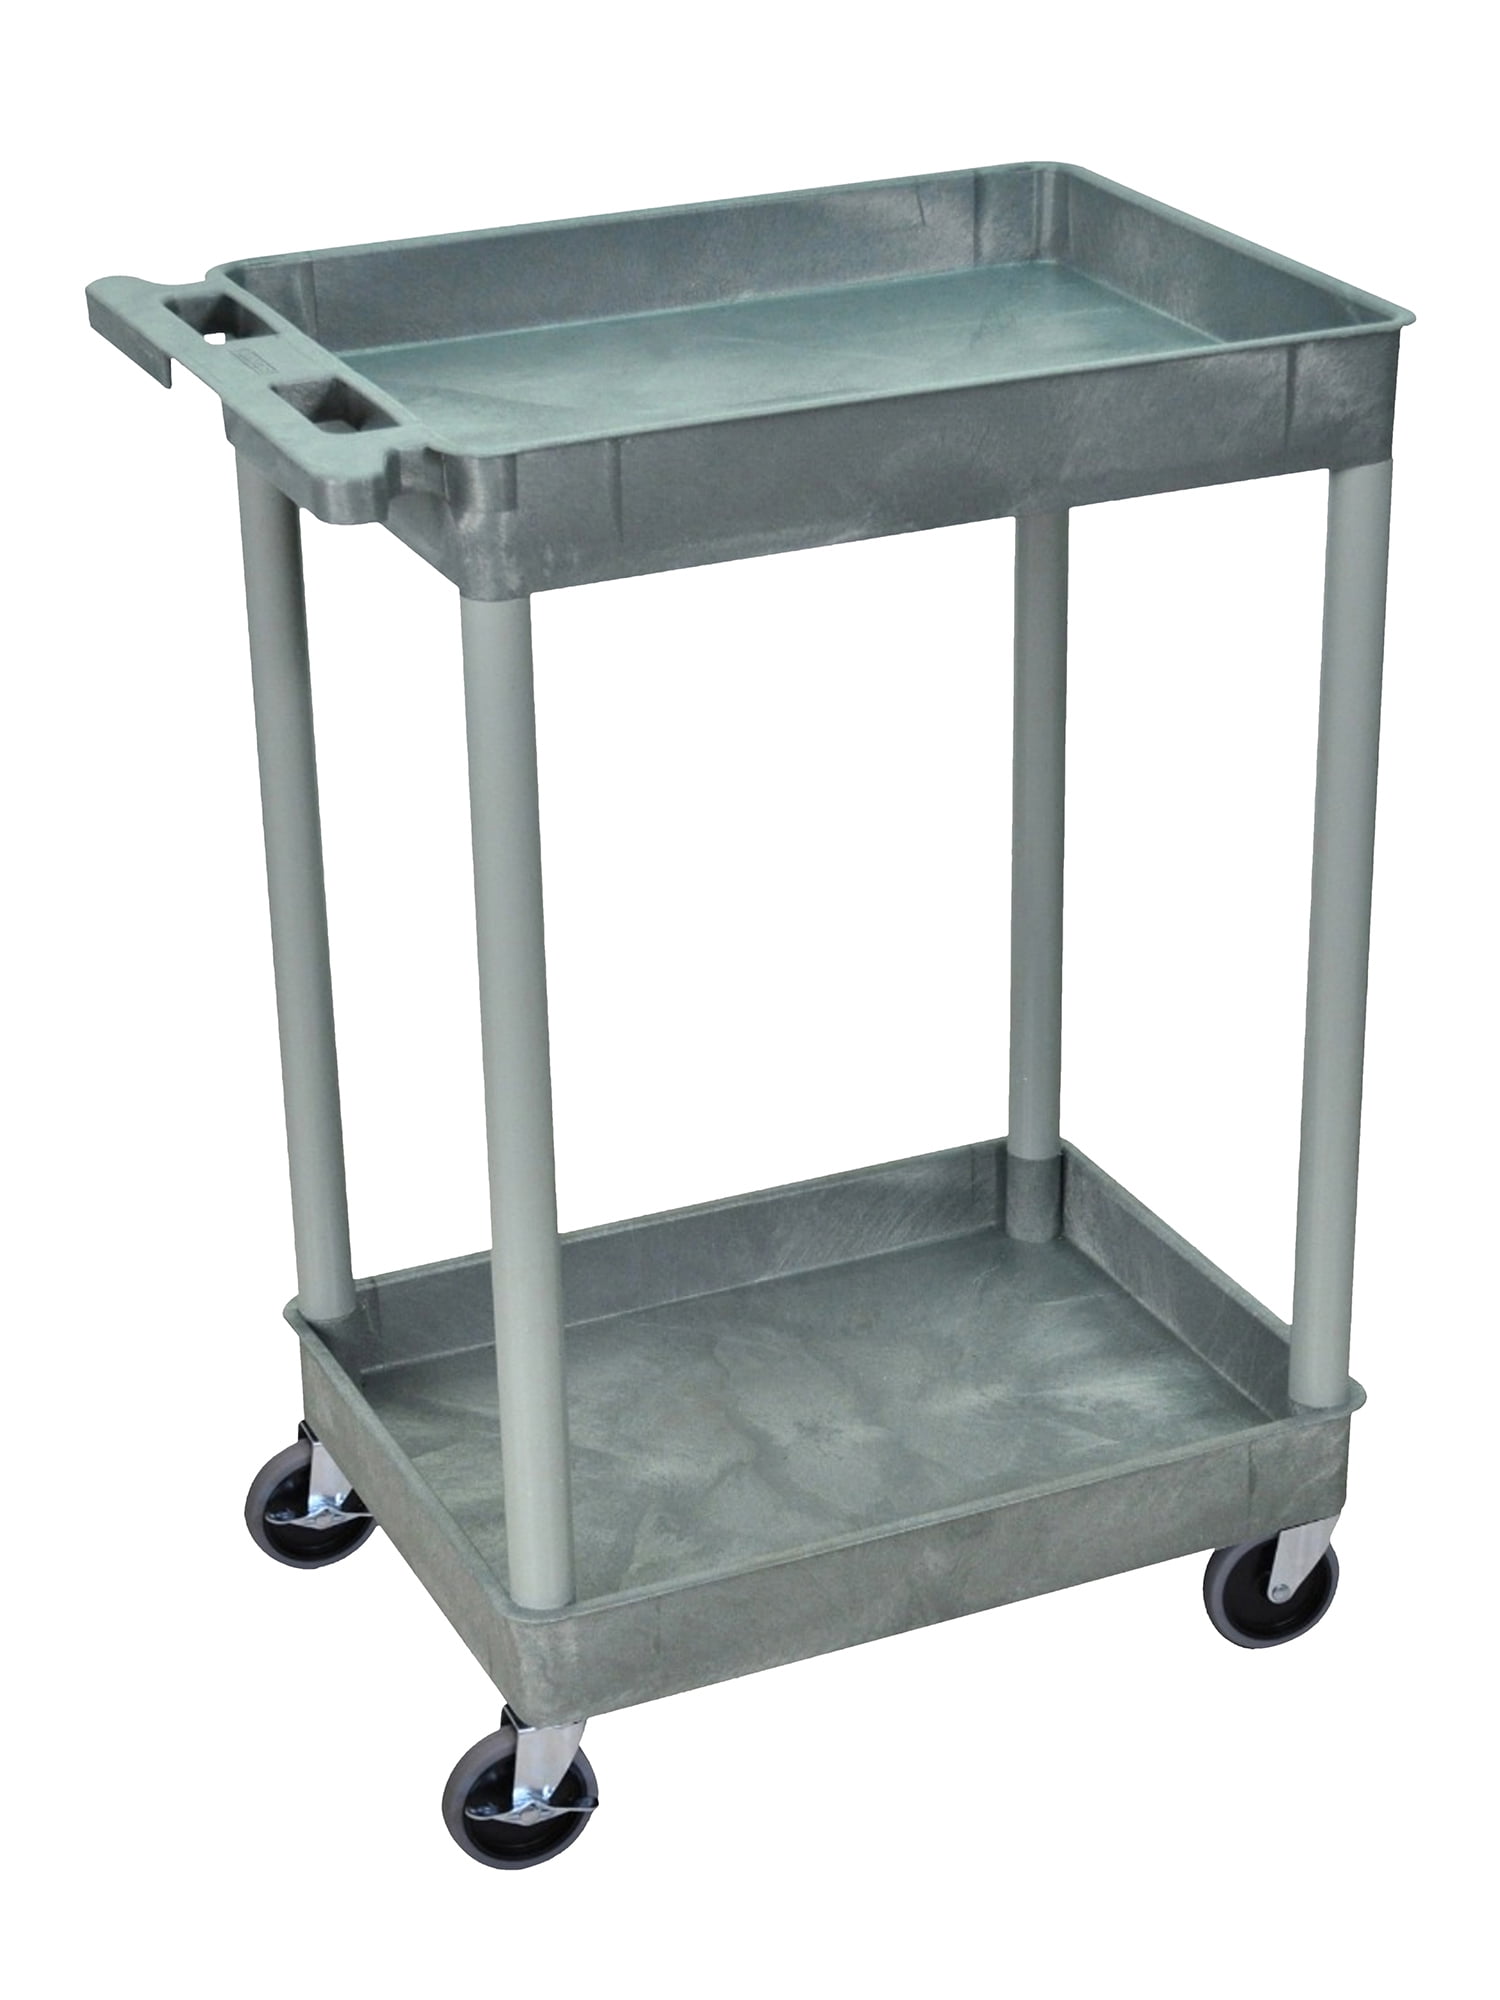 MaxWorks 80384 Black and Gray Two-Tray Service/Utility Cart With Aluminum Legs 